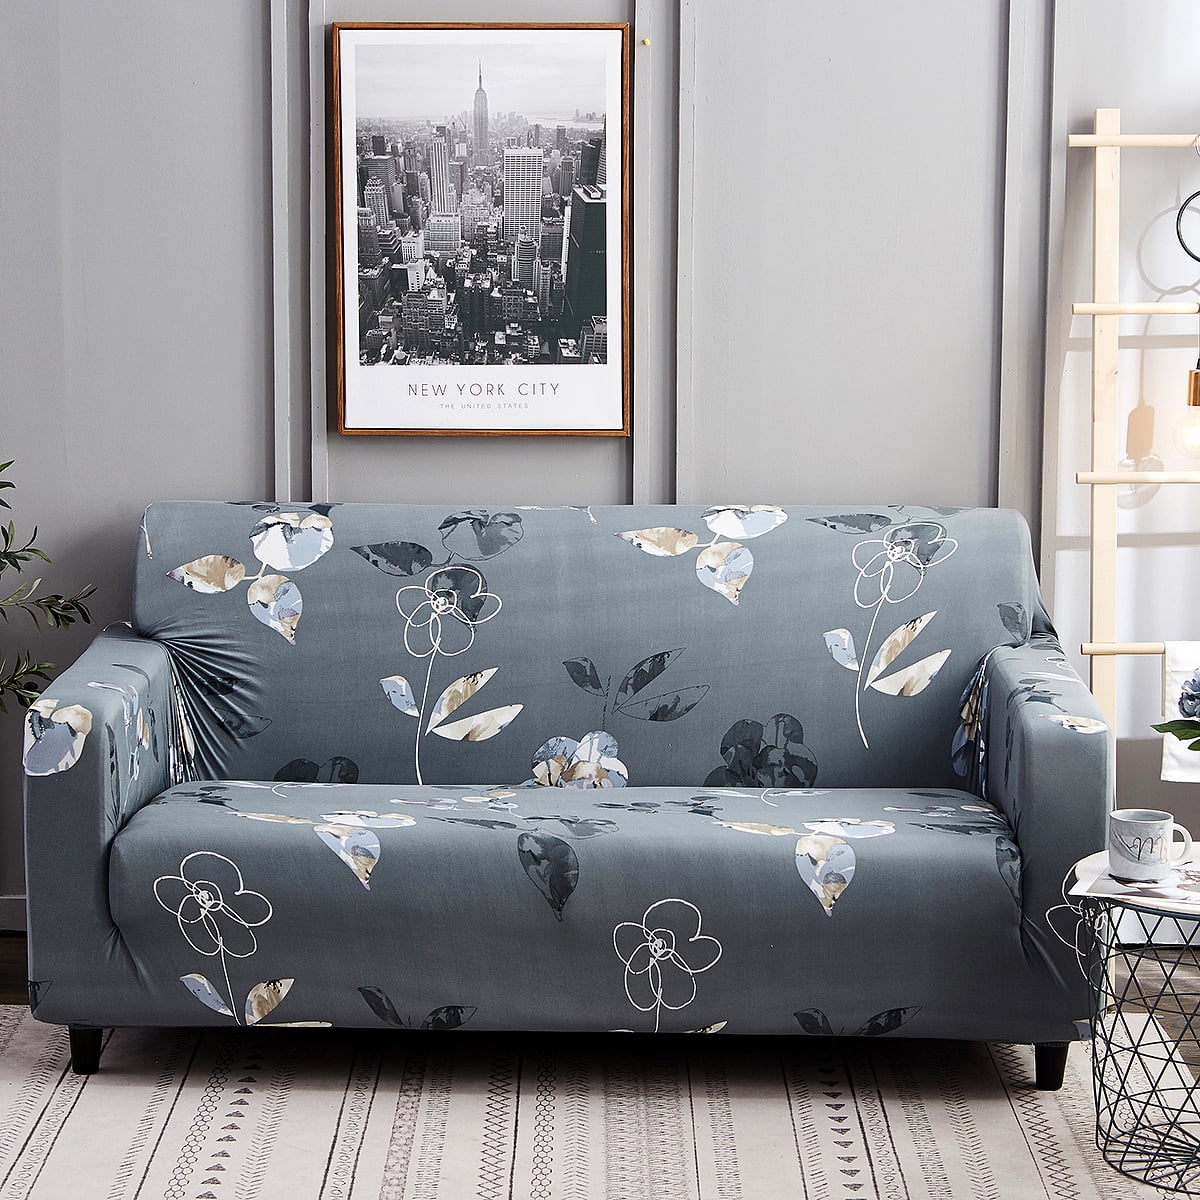 Details about   1-4 Seater Sofa Covers Slipcovers Stretch Retro Corner Sofa Sectional Couch Fit 